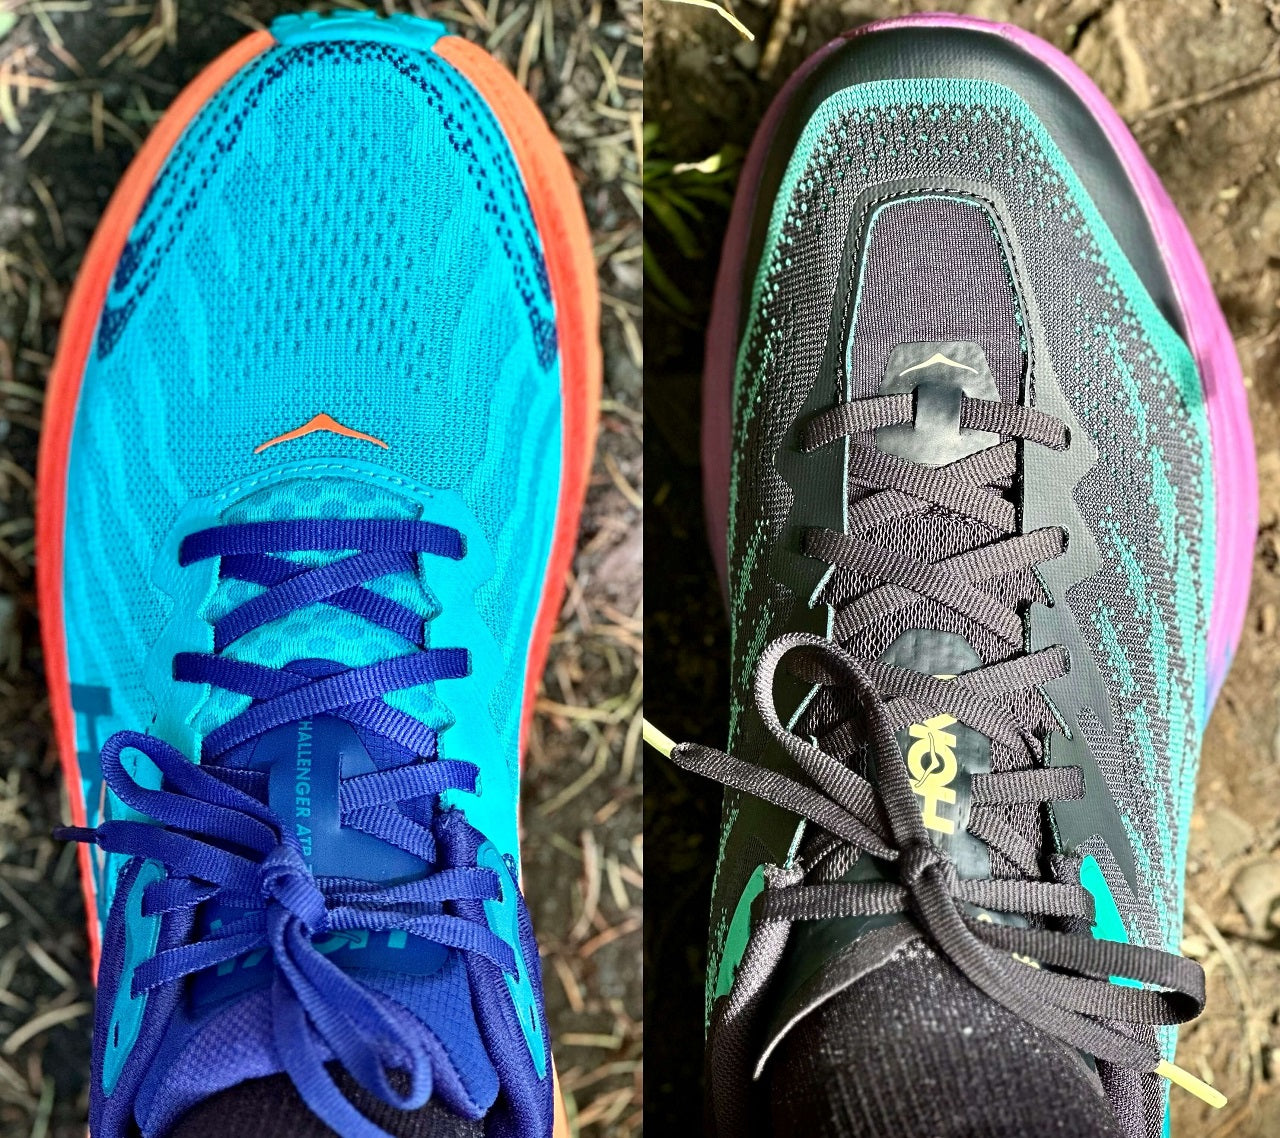 Toe box of HOKA Challenger and HOKA Speedgoat trail running shoes shown side by side